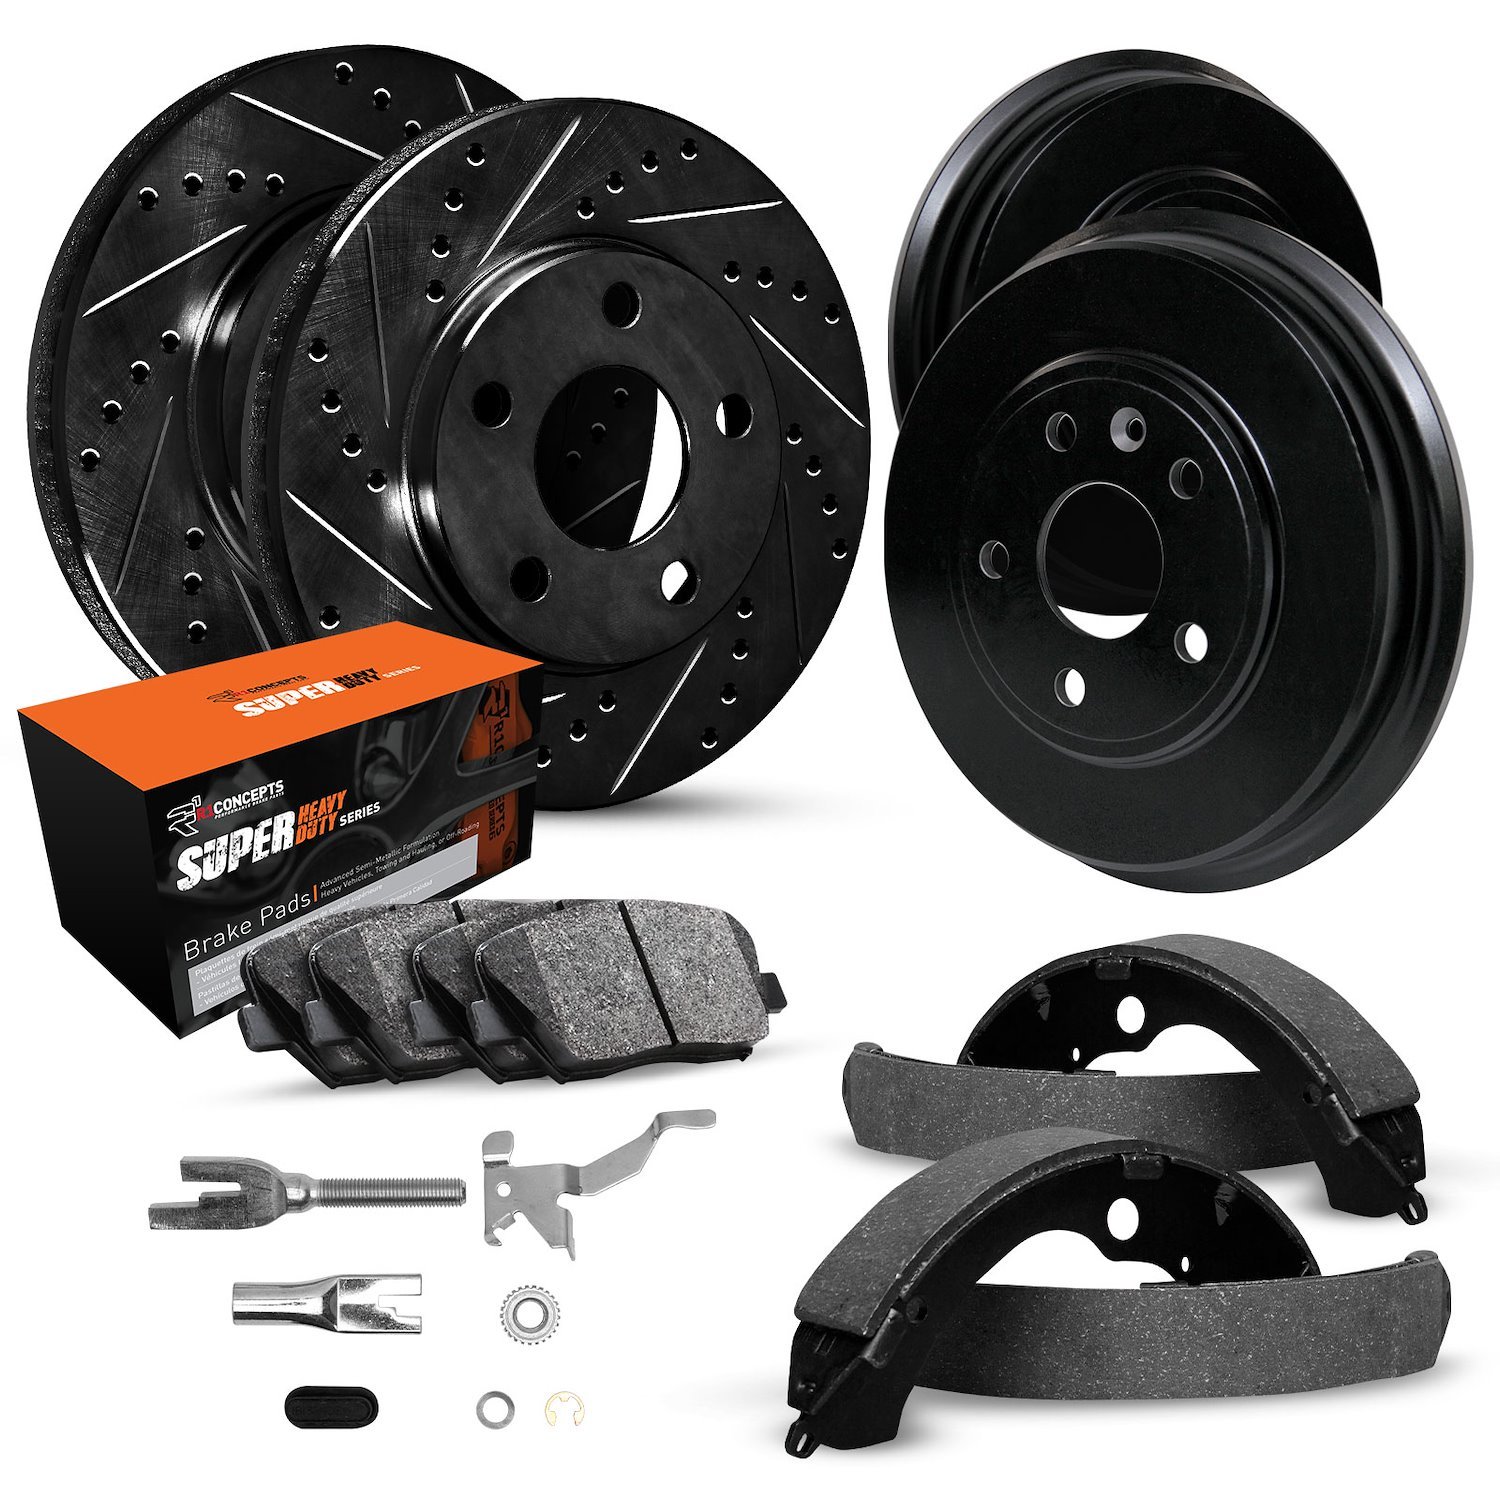 E-Line Drilled & Slotted Black Brake Rotor & Drum Set w/Super-Duty Pads, Shoes, & Adjusters, 1974-1991 GM